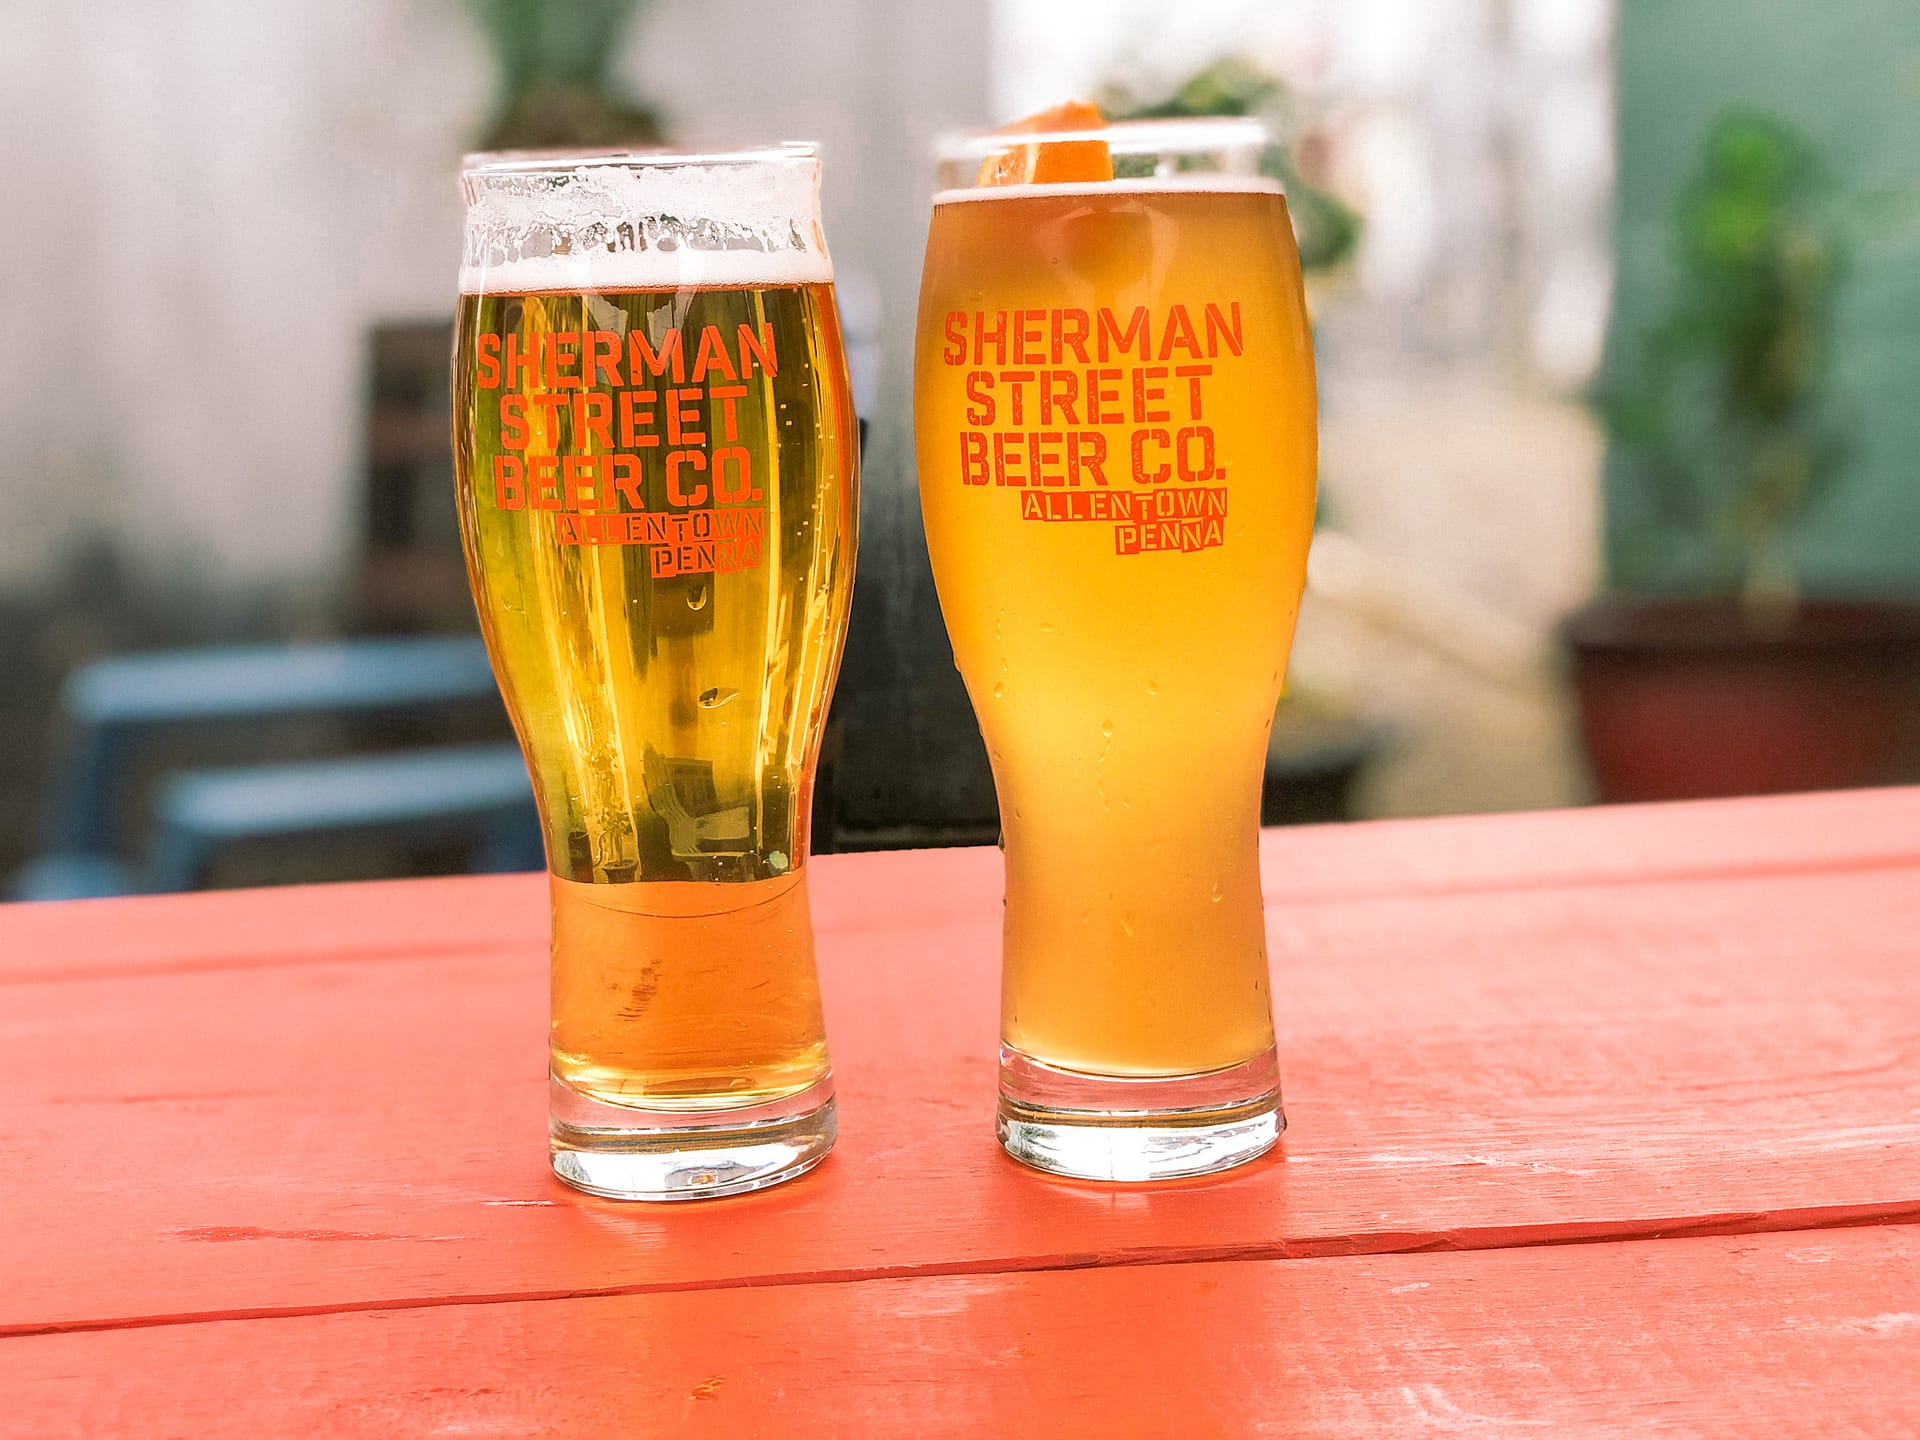 Two glasses of beer placed on a red table and glass reads Sherman Street Beer Co.